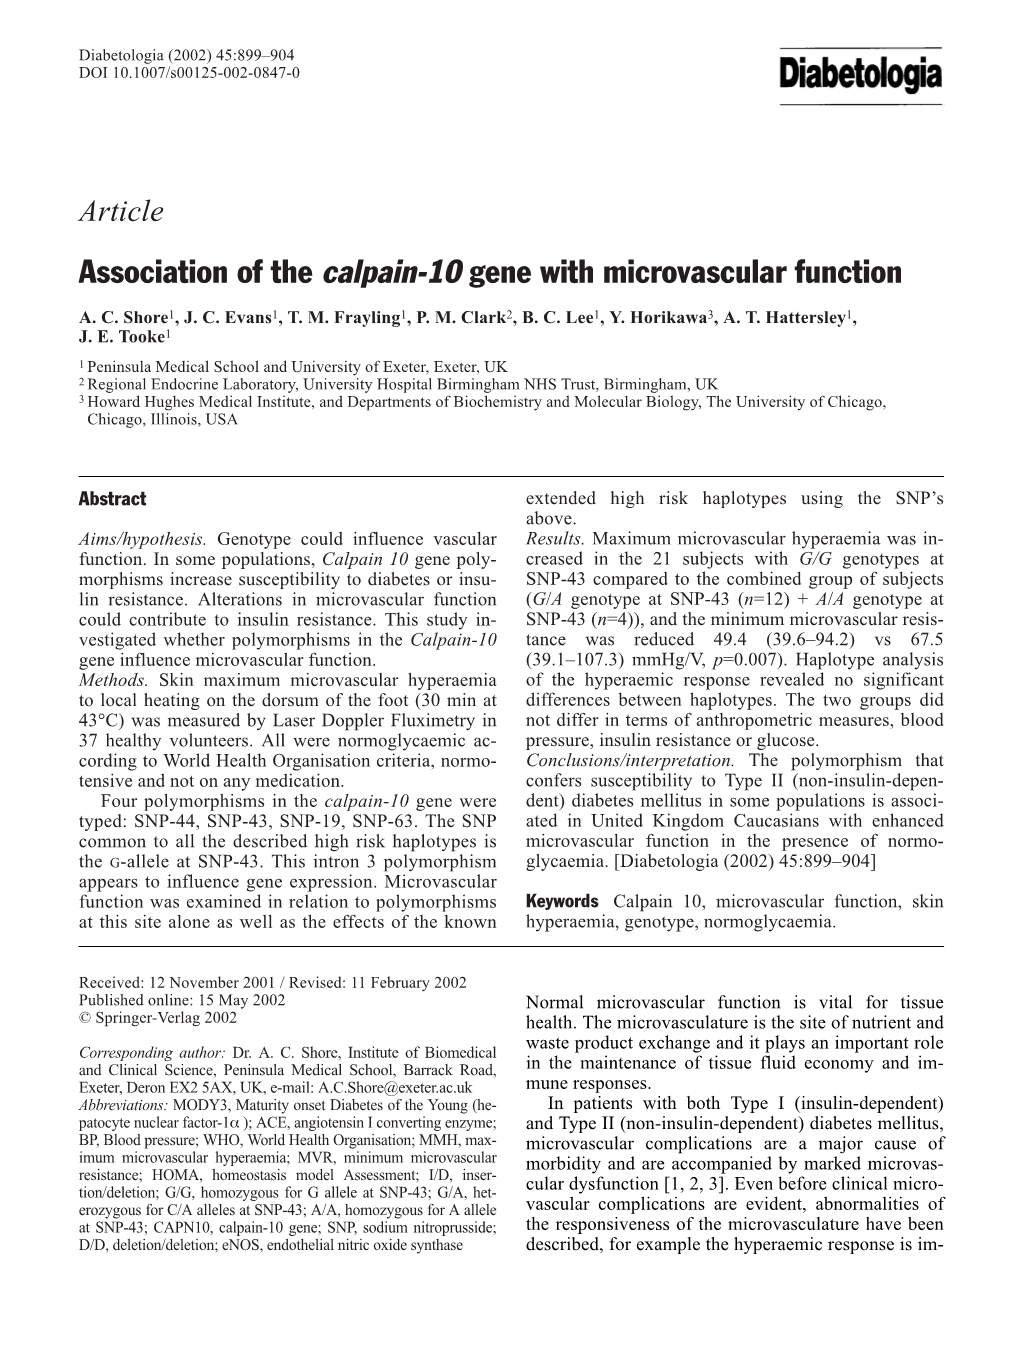 Association of the Calpain-10 Gene with Microvascular Function